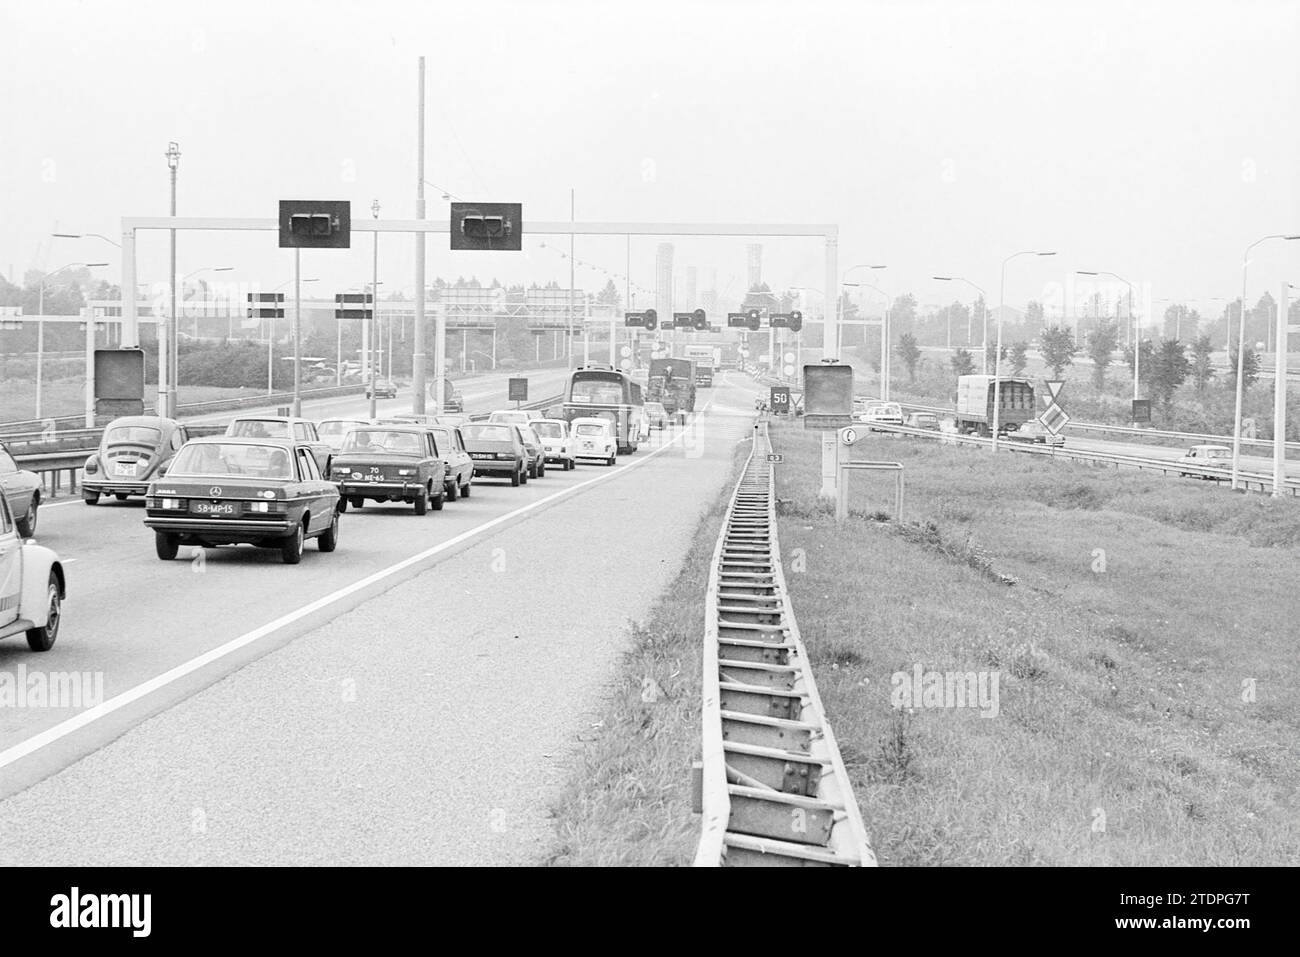 Busy Velsertunnel, Busy, Velsertunnel, 23-09-1977, Whizgle News from the Past, Tailored for the Future. Explore historical narratives, Dutch The Netherlands agency image with a modern perspective, bridging the gap between yesterday's events and tomorrow's insights. A timeless journey shaping the stories that shape our future Stock Photo